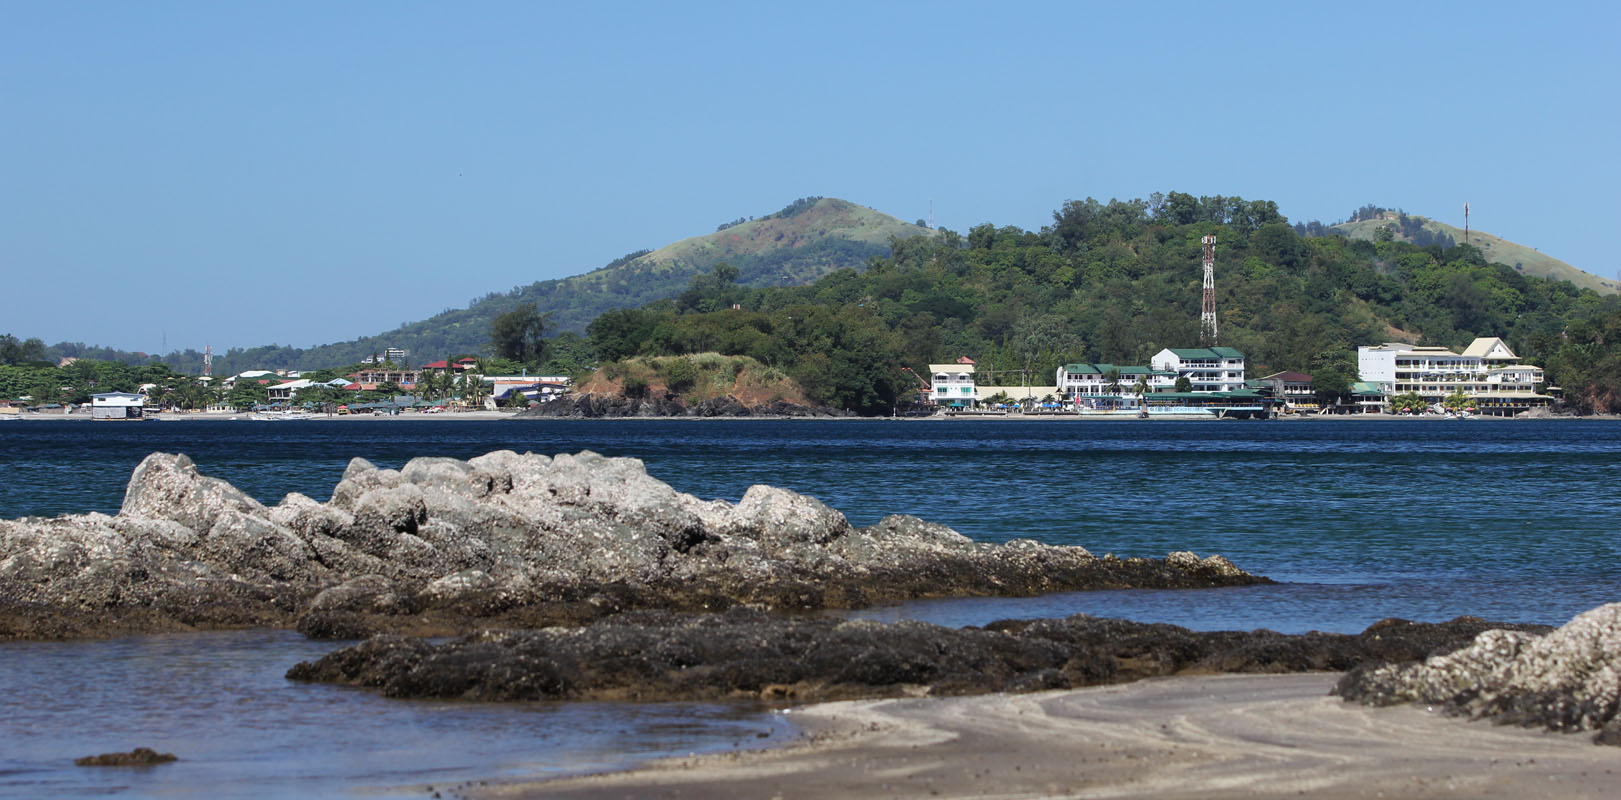 Diving sites in Luzon - Subic Bay